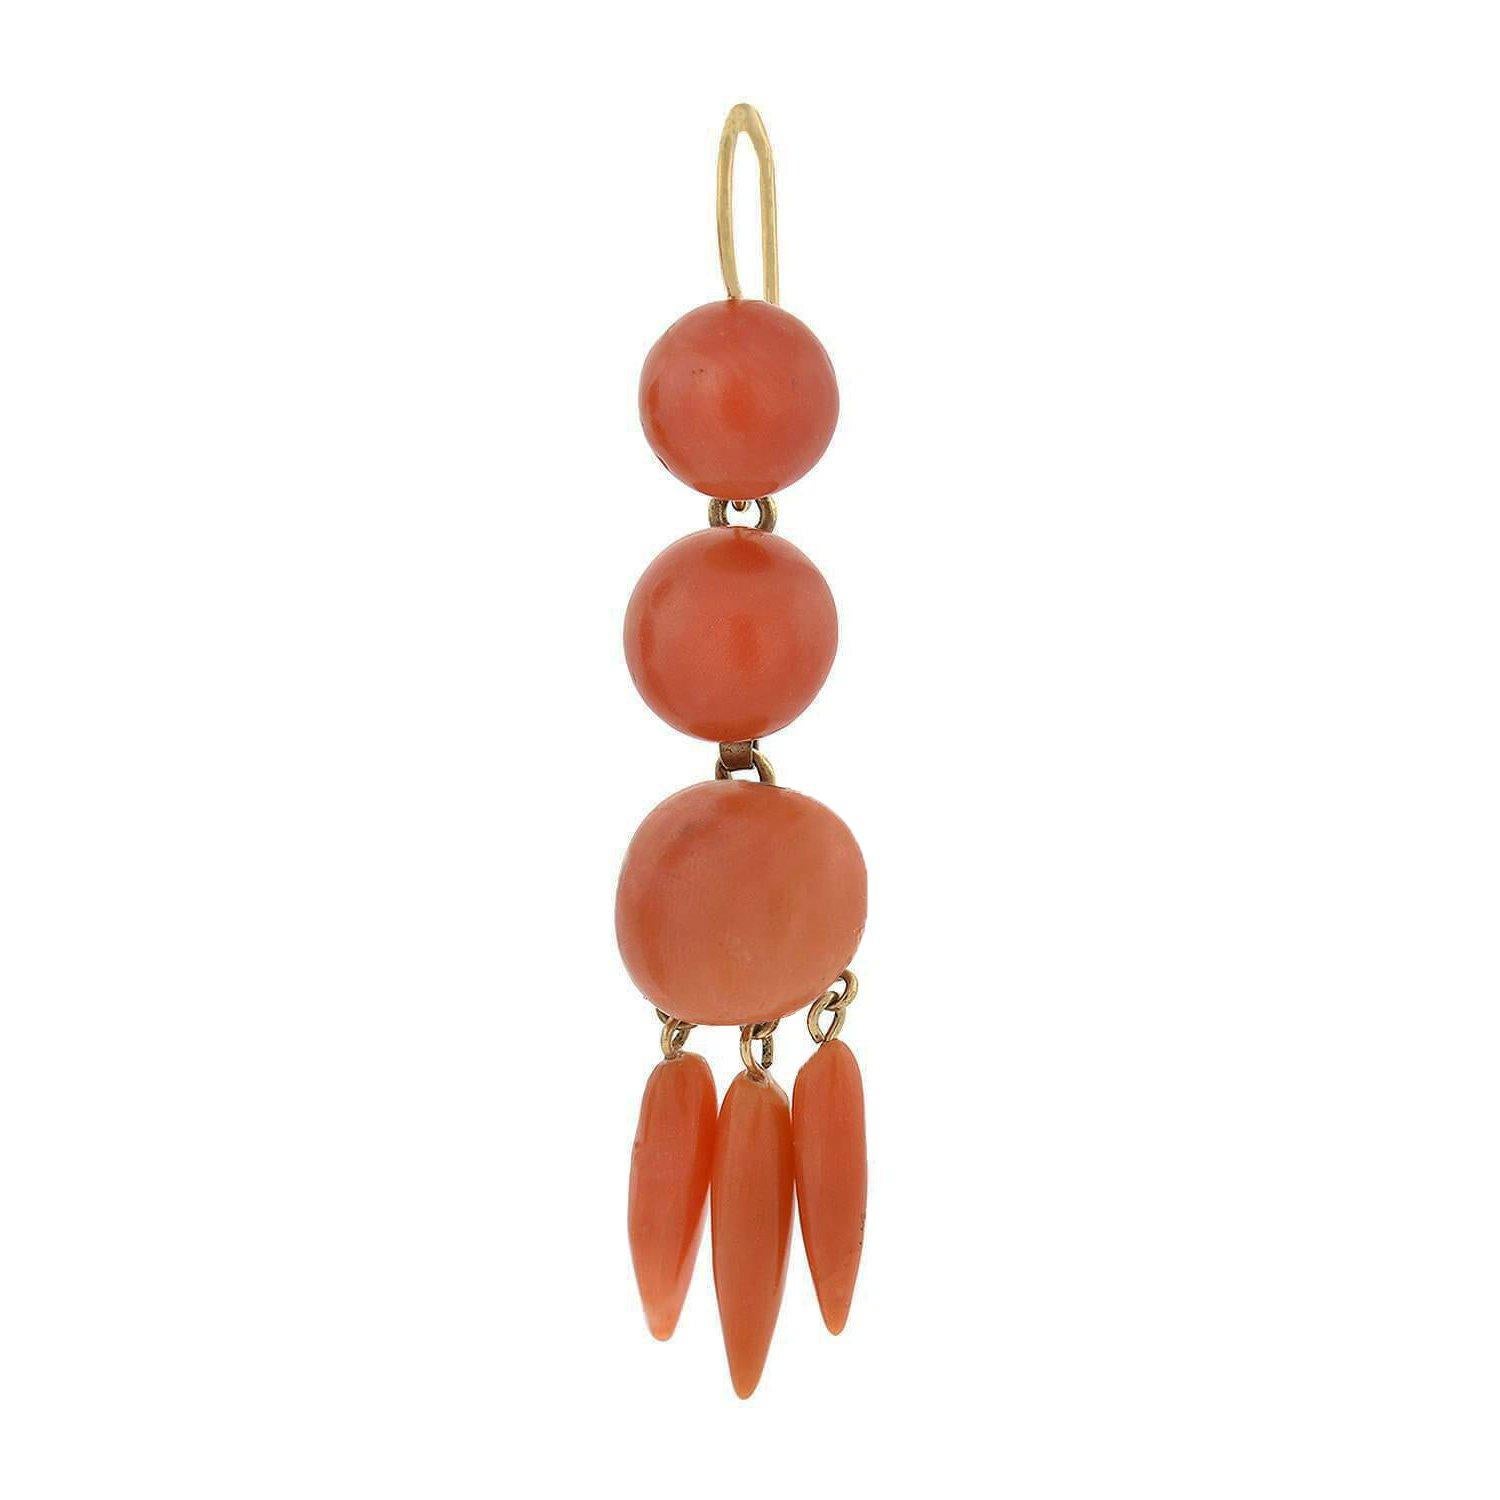 A wonderful pair of hanging coral earrings from the Victorian (ca1880s) era! Crafted in 14kt yellow gold these beautiful earrings feature smoothly-polished and hand-carved salmon-colored coral links. Each consists of three graduated coral beads